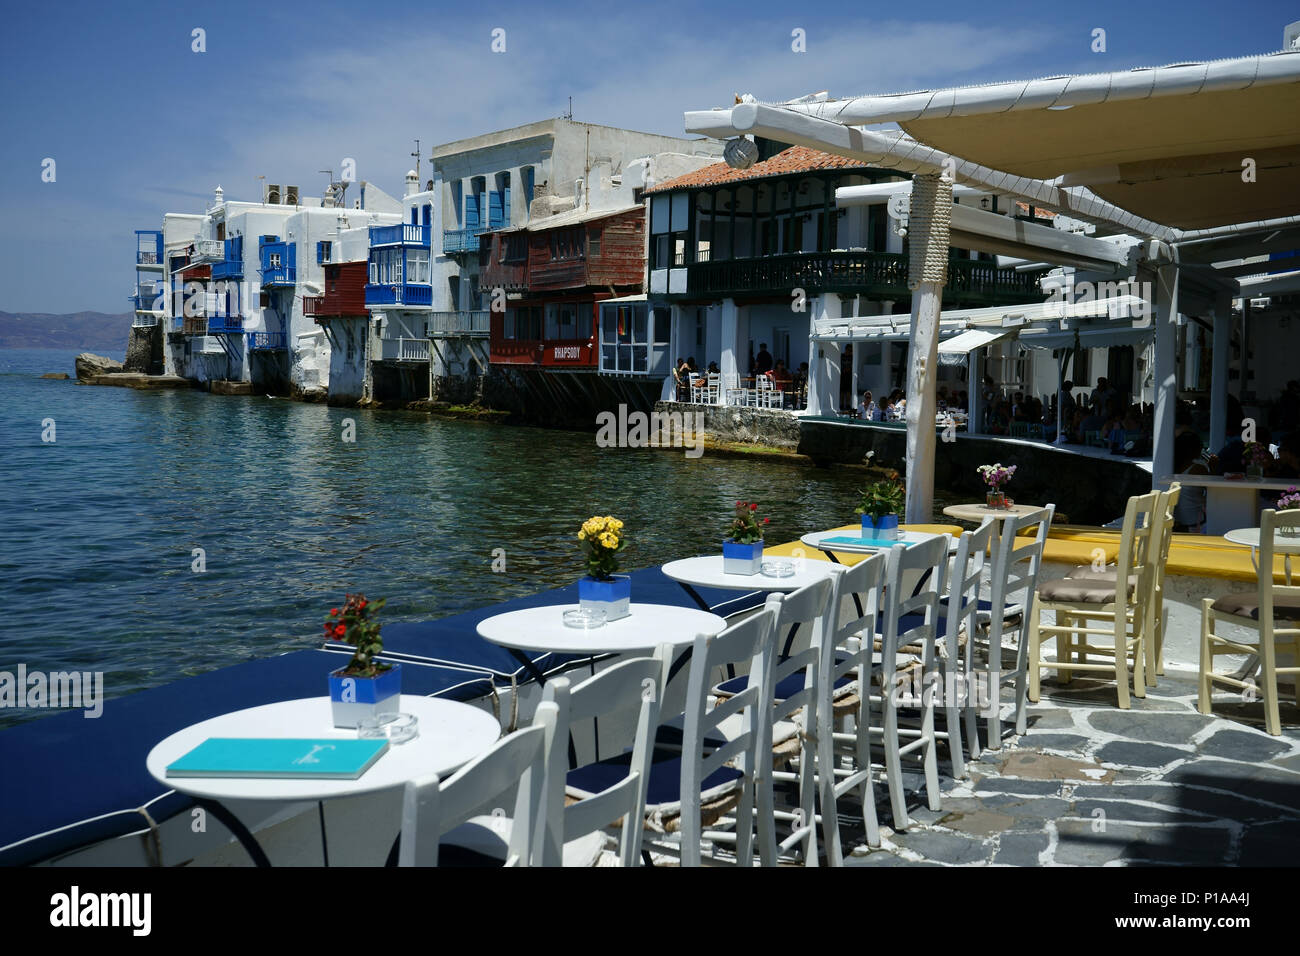 View from street restaurant along beach to area cald 'Llittle Venice' in town Mykonos, Cyclades islands, Greece Stock Photo